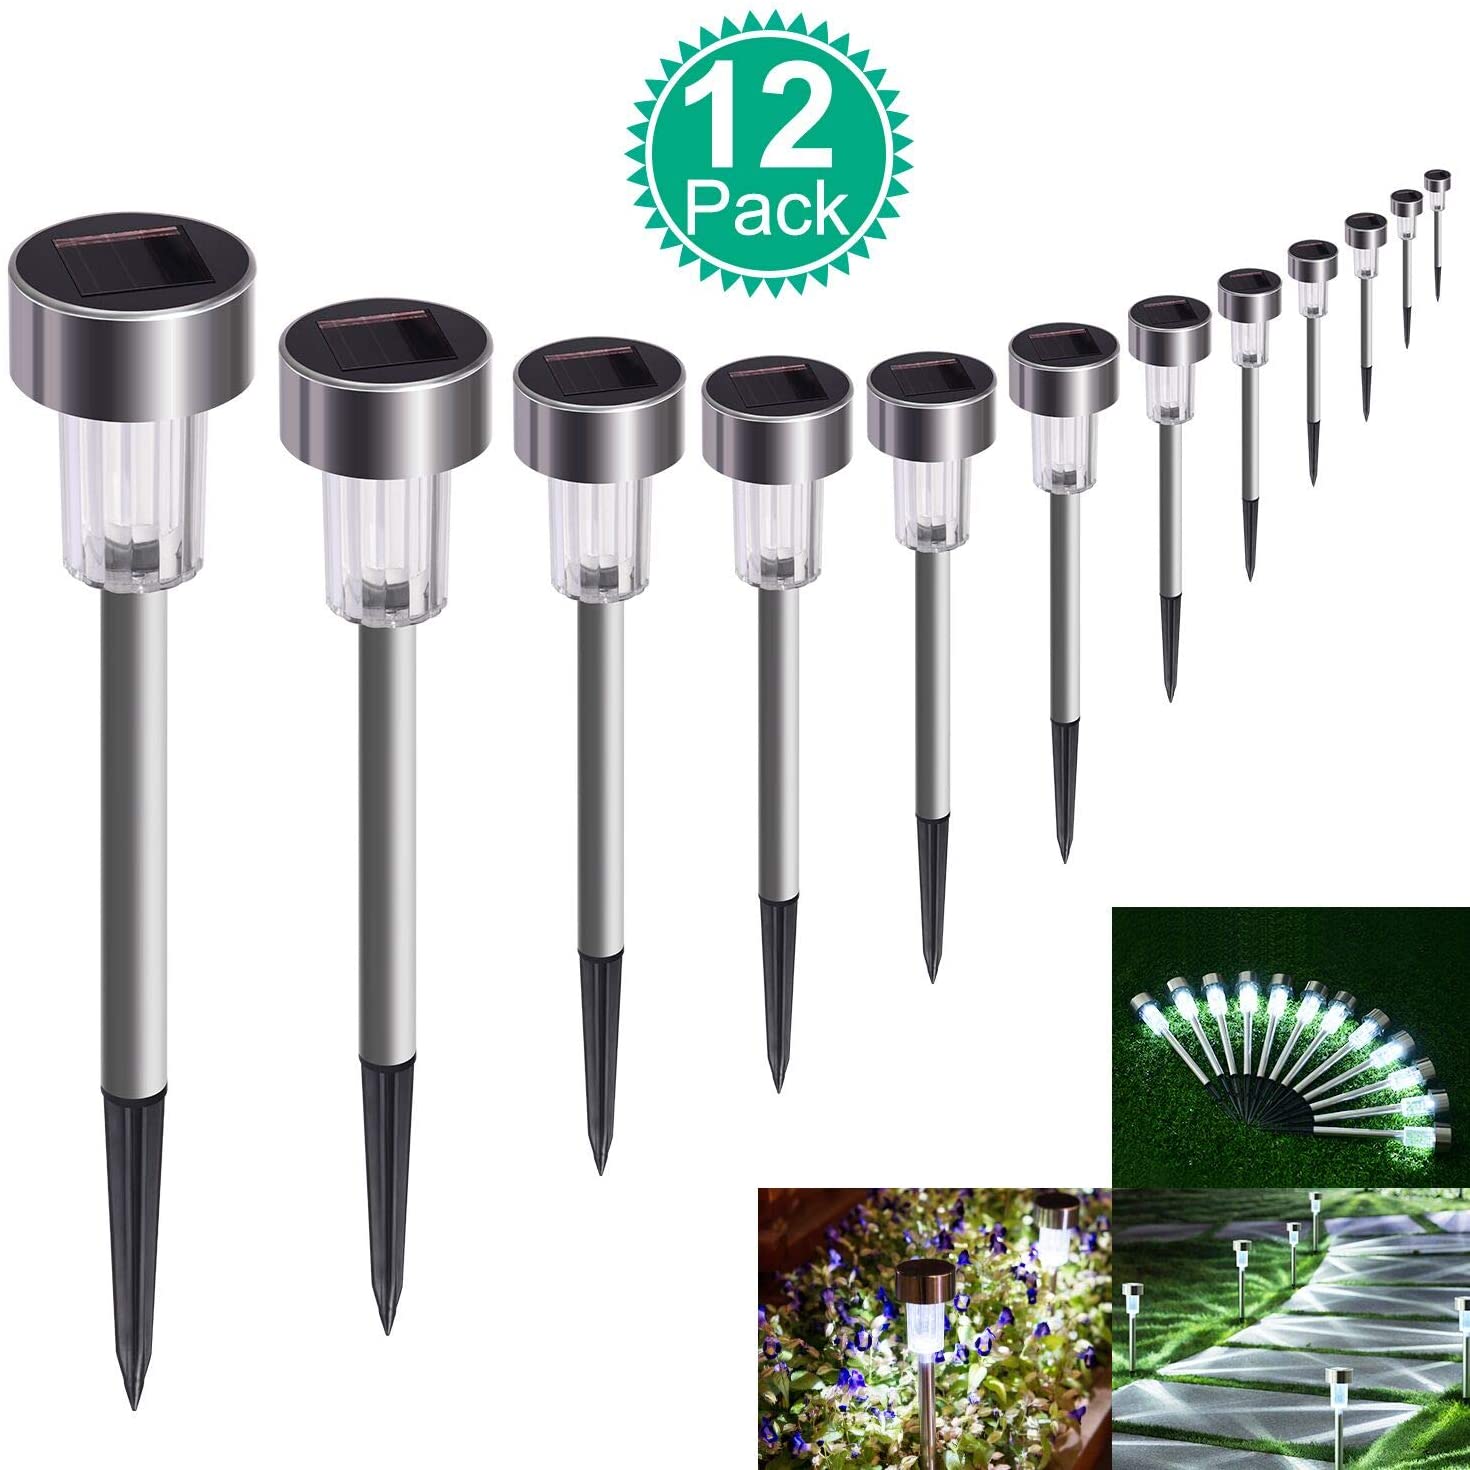 Solar Lights Outdoor, 12Pack Stainless Steel Outdoor Solar Lights - Waterproof, LED Landscape Lighting Solar Powered Outdoor Lights Solar Garden Lights for Pathway Walkway Patio Yard Lawn-Cool White - image 1 of 9